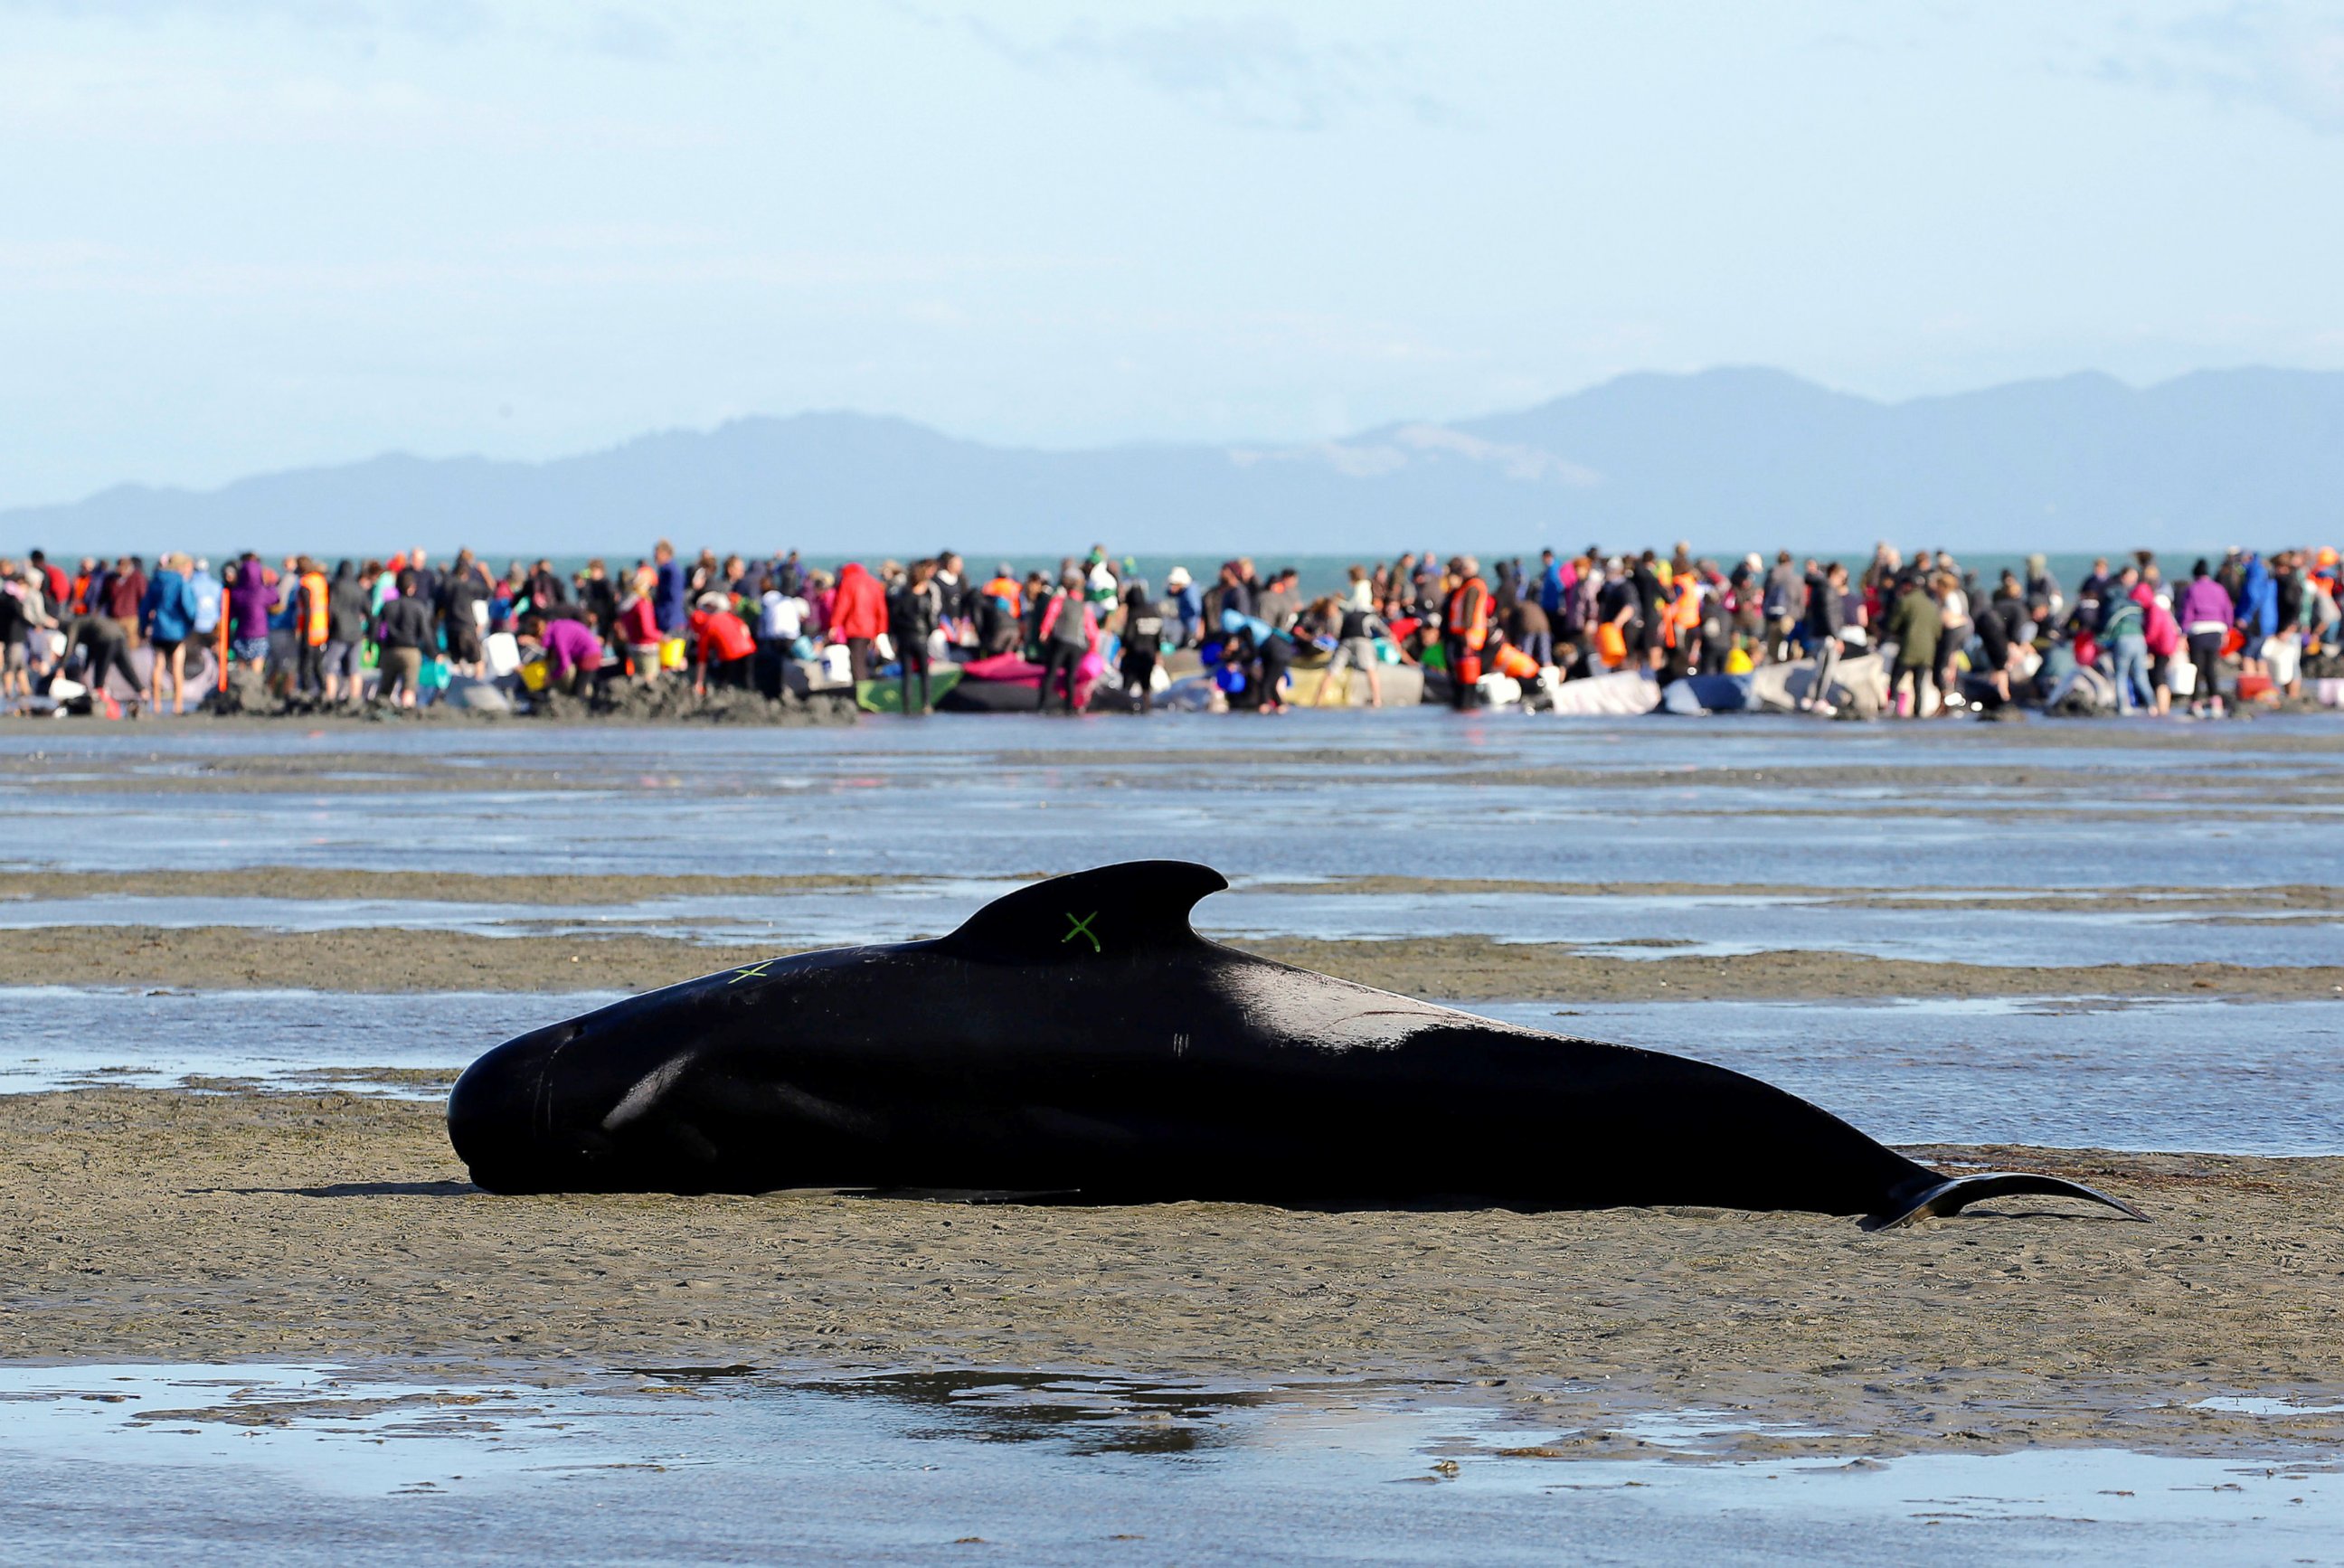 PHOTO: Volunteers help some of the hundreds of stranded pilot whales still alive, as one lies marked with an “X” to indicate it has died, in Golden Bay at the top of New Zealand's South Island, Feb. 10, 2017.